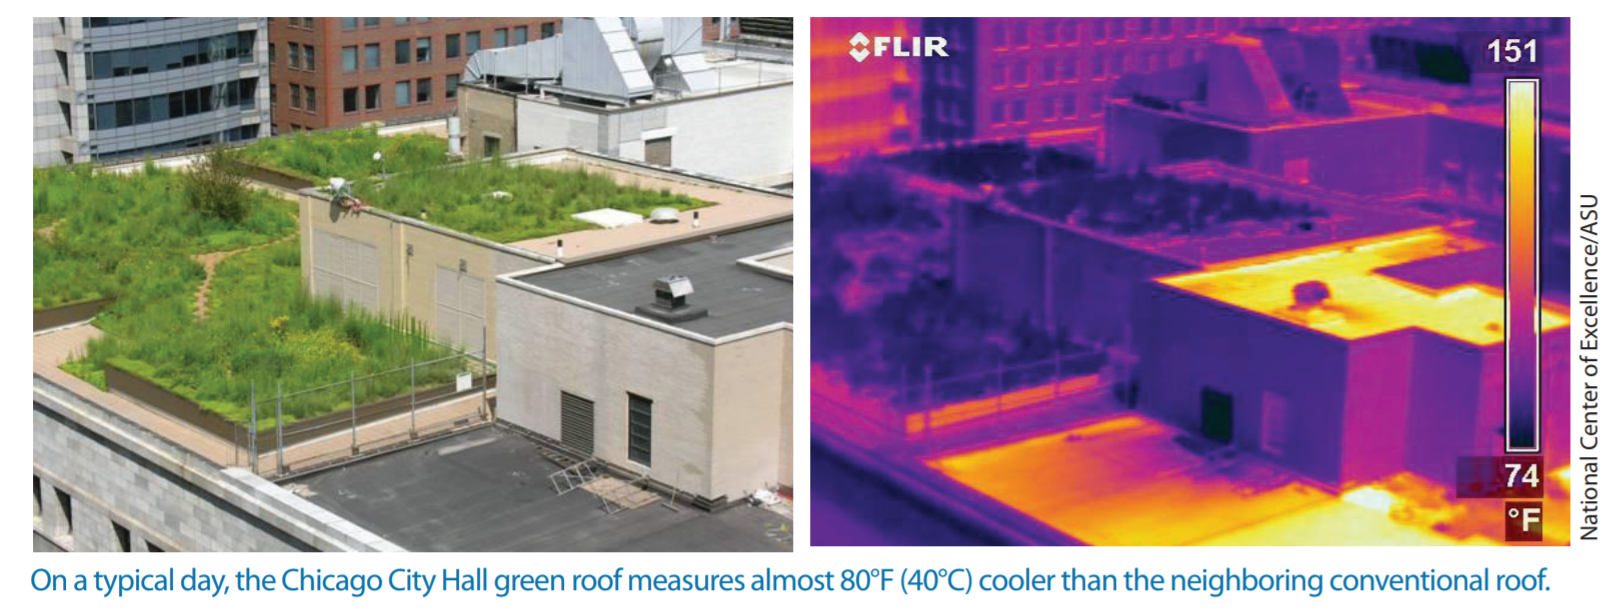 Images comparing temperature of a green roof vs. a conventional roof.